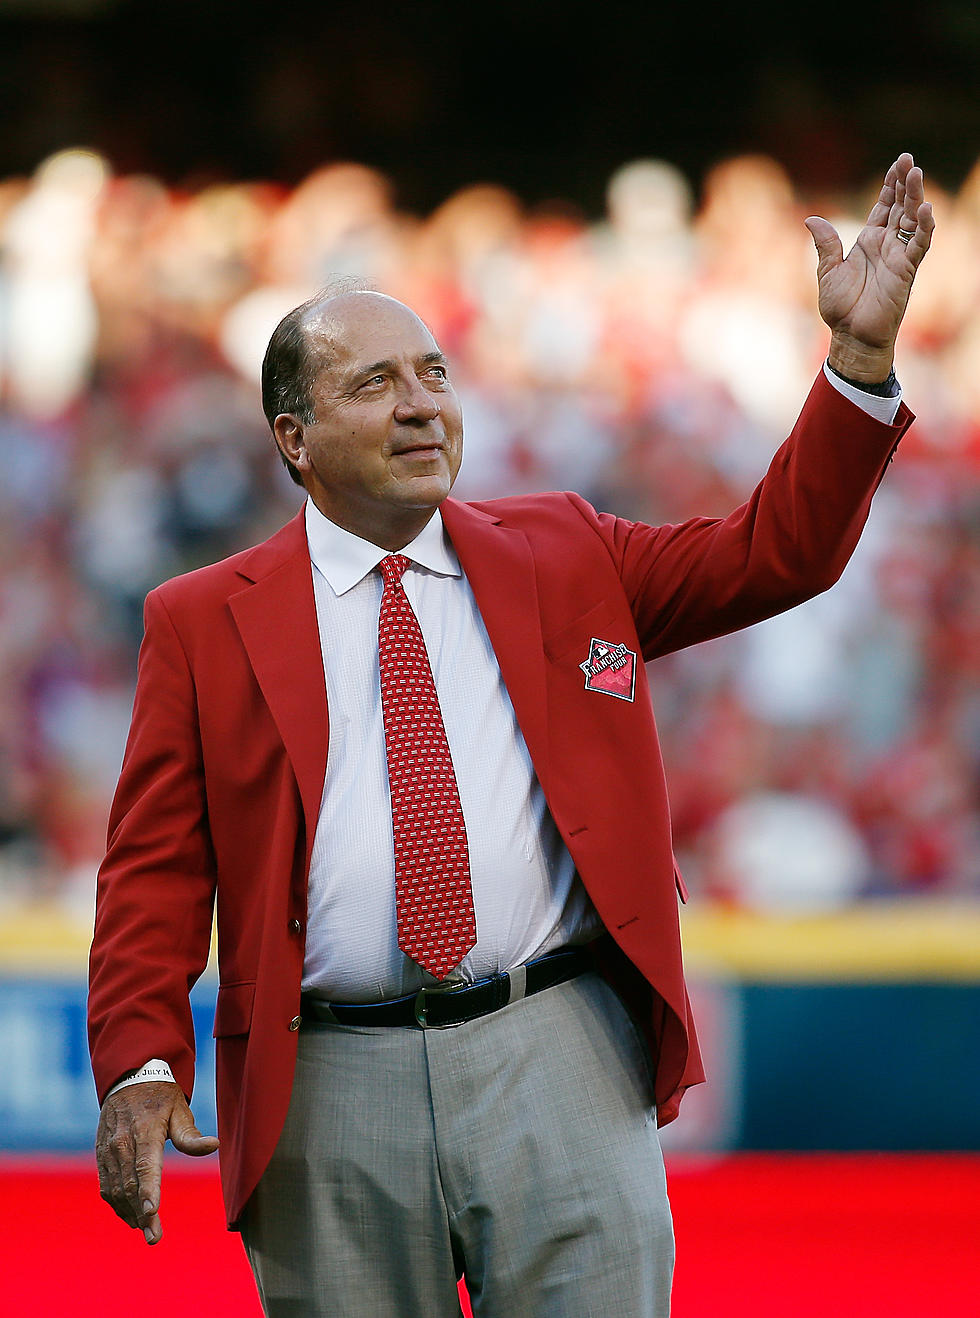 On This Day – Johnny Bench’s uniform retired